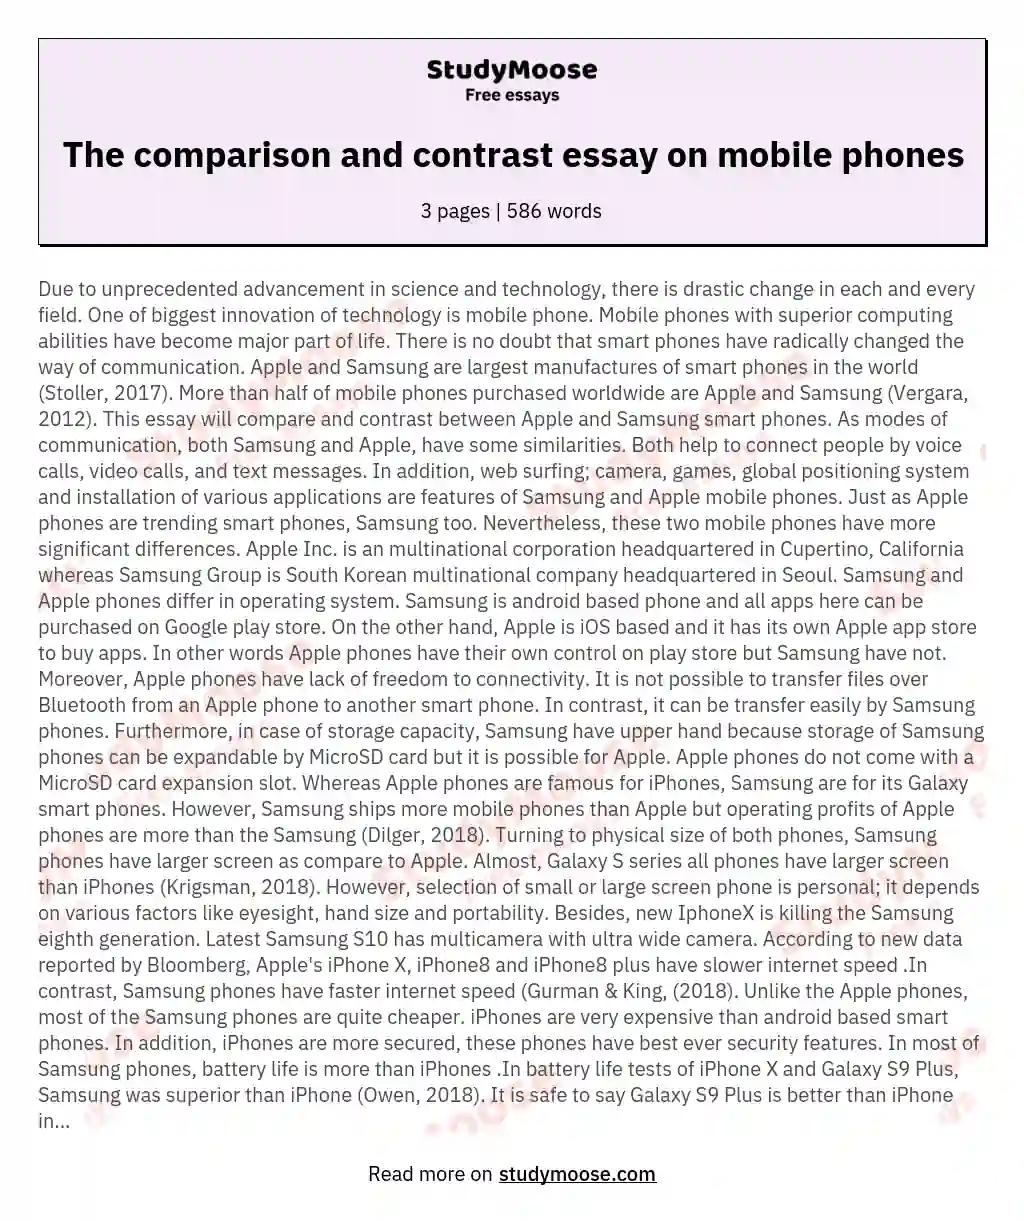 The comparison and contrast essay on mobile phones essay